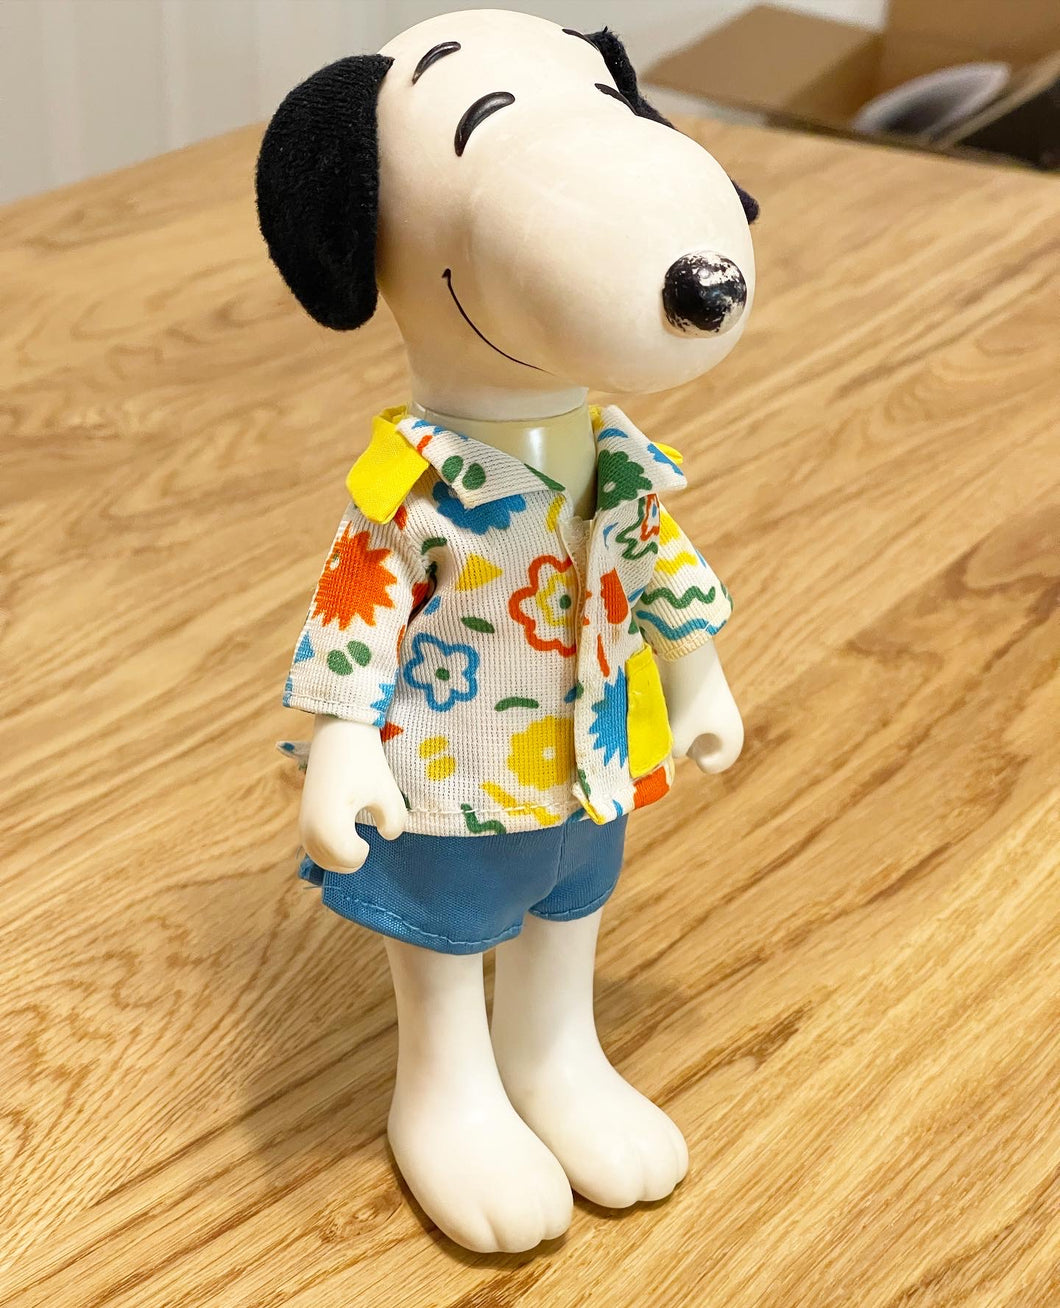 1966 vintage Snoopy doll in beach summer safari outfit from peanuts